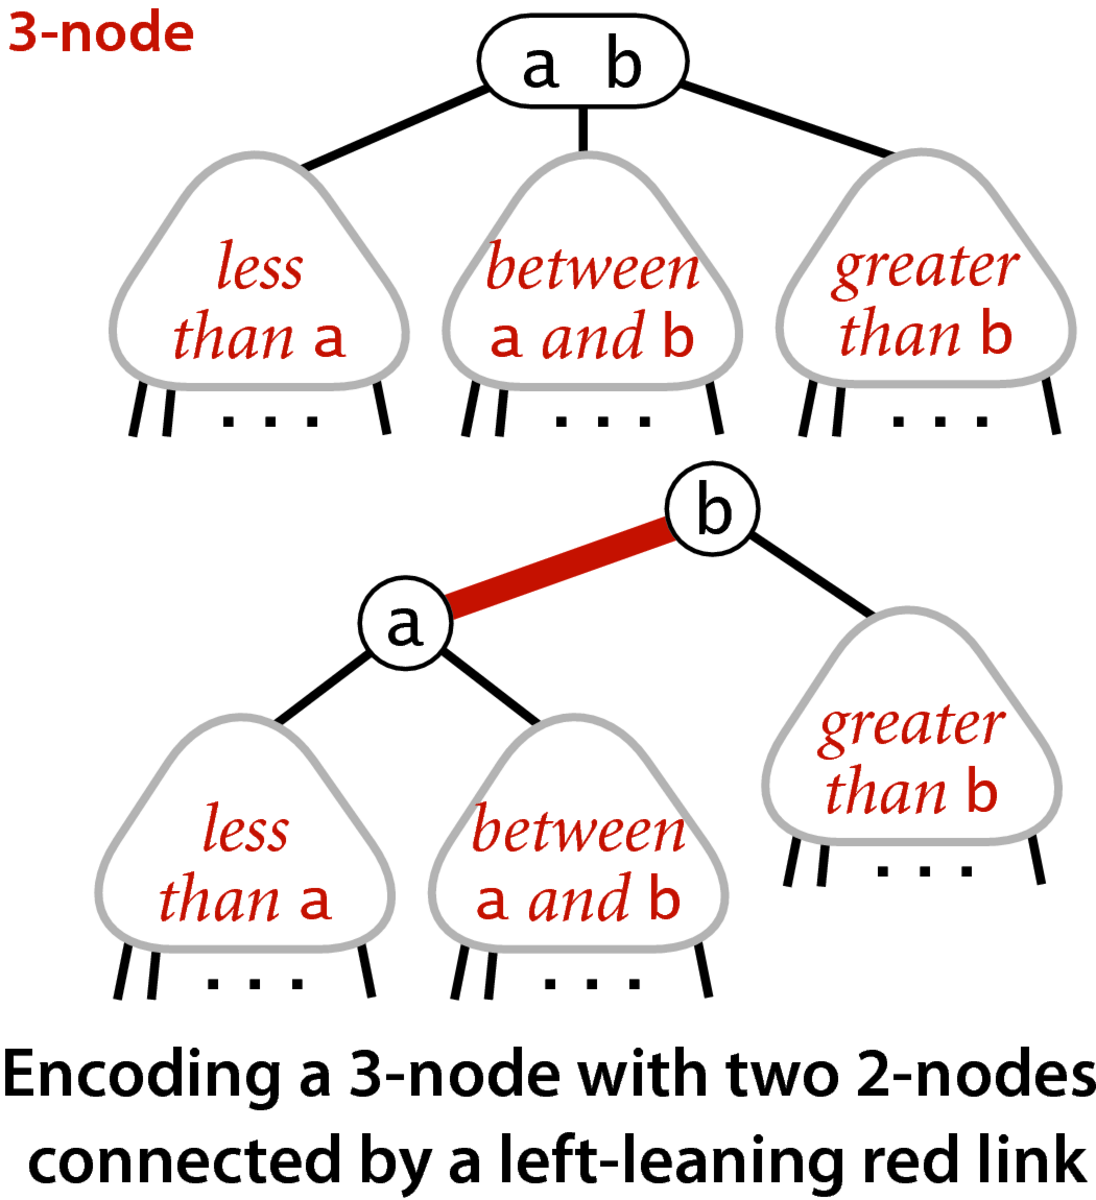 [Encoding a 3-node with two 2-nodes connected by a left-leaning red link (p.432)]